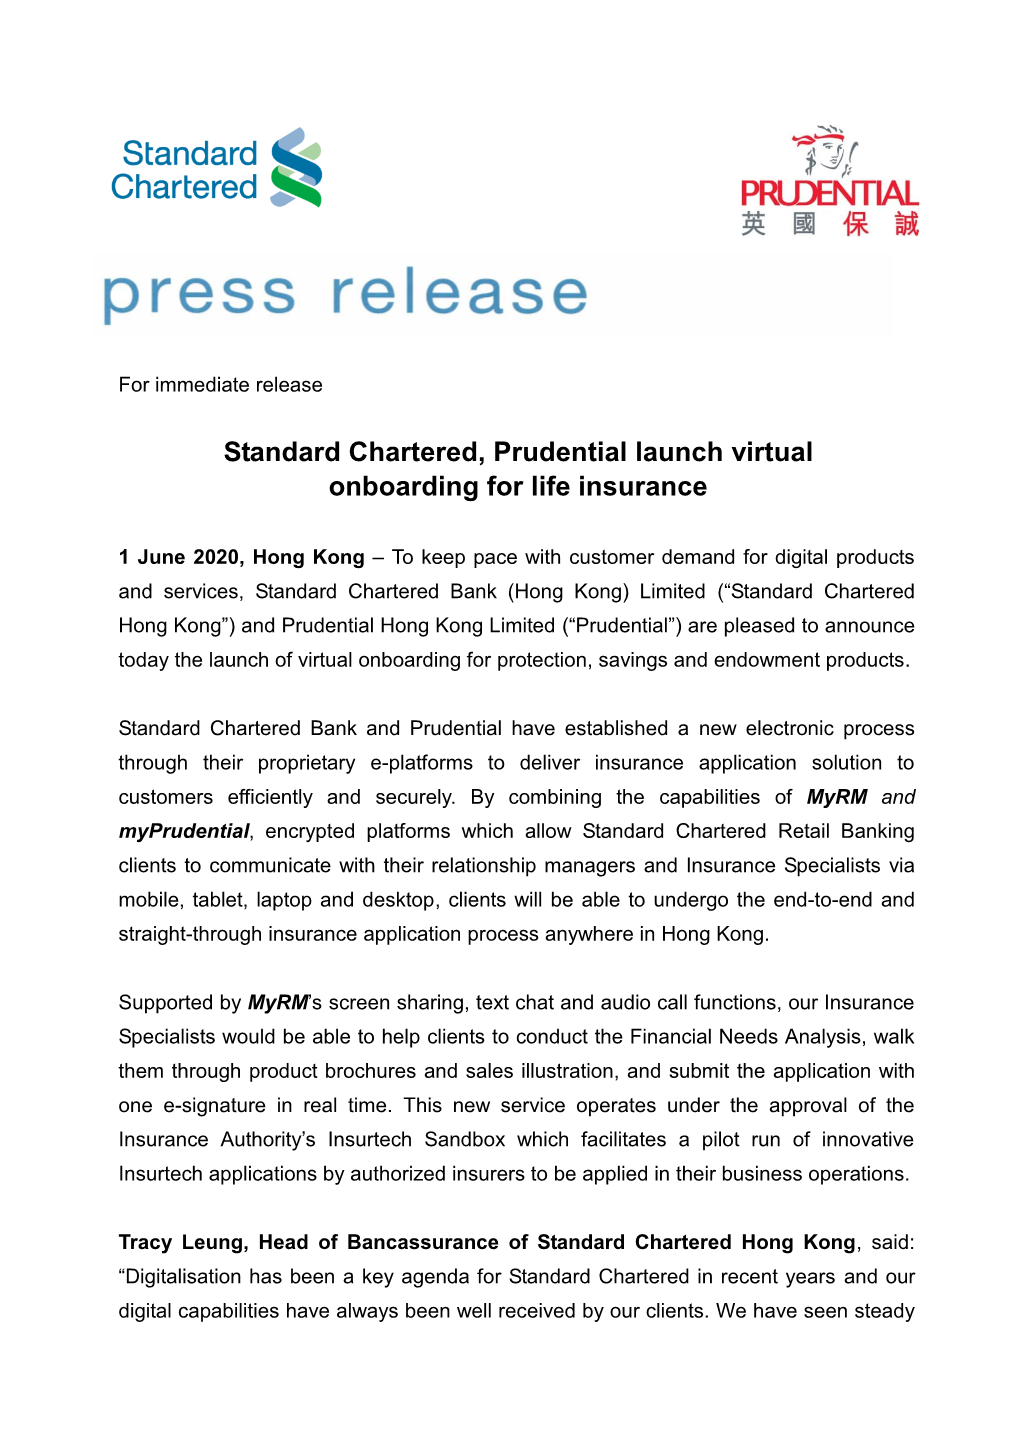 Standard Chartered, Prudential Launch Virtual Onboarding for Life Insurance